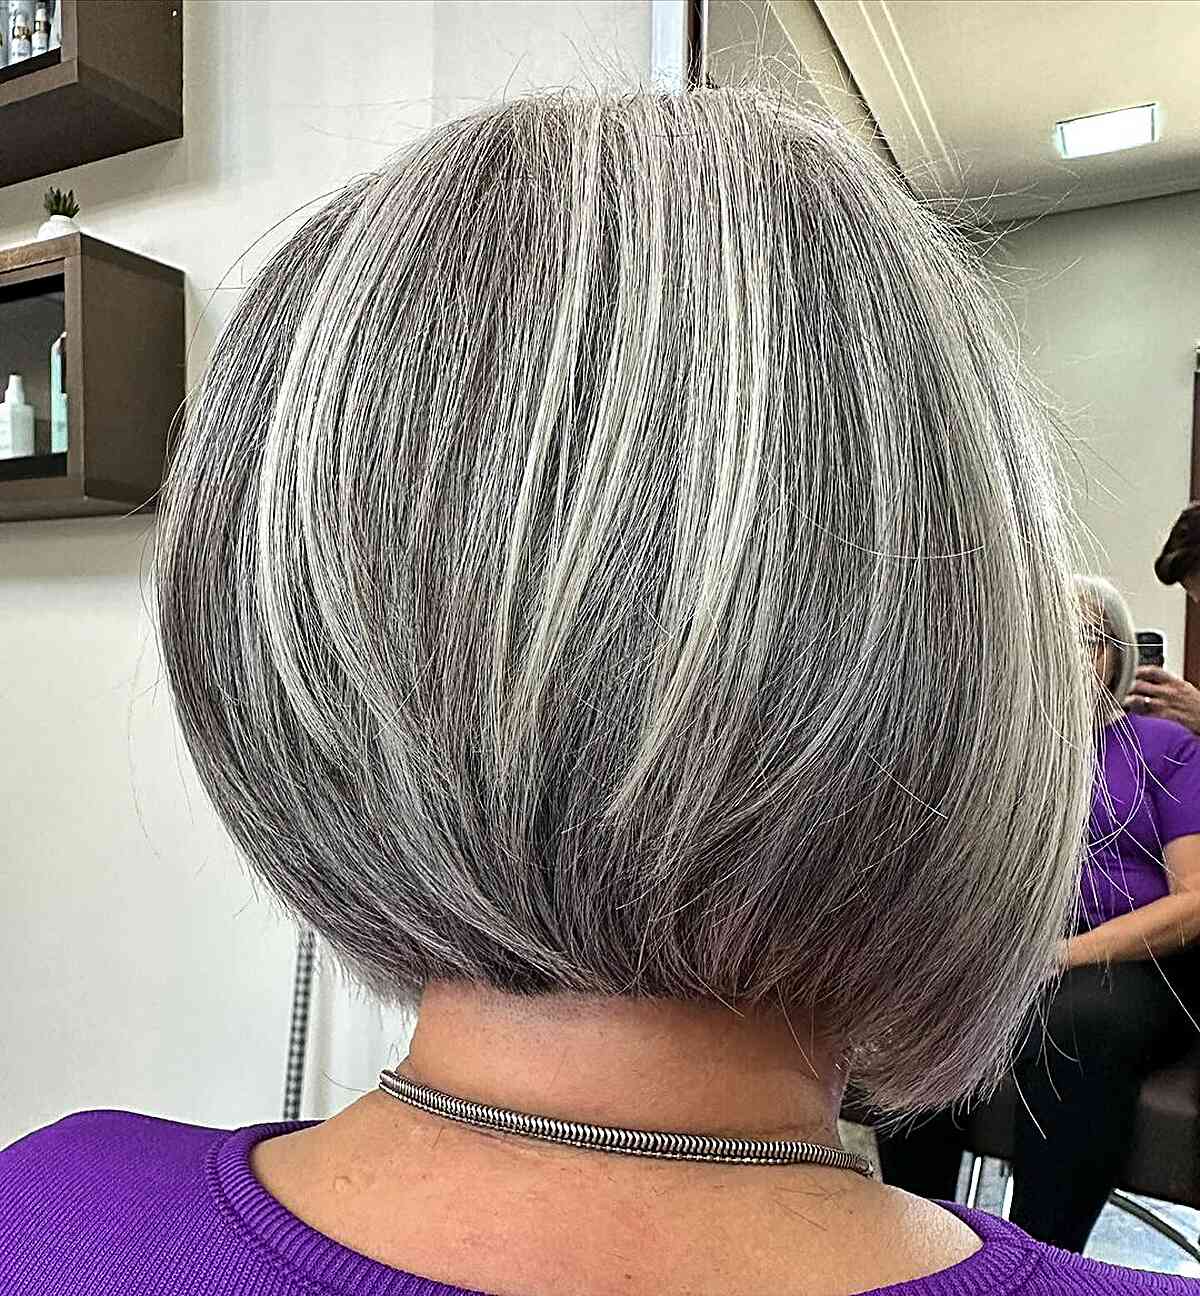 Salted and Peppered Bob Cut